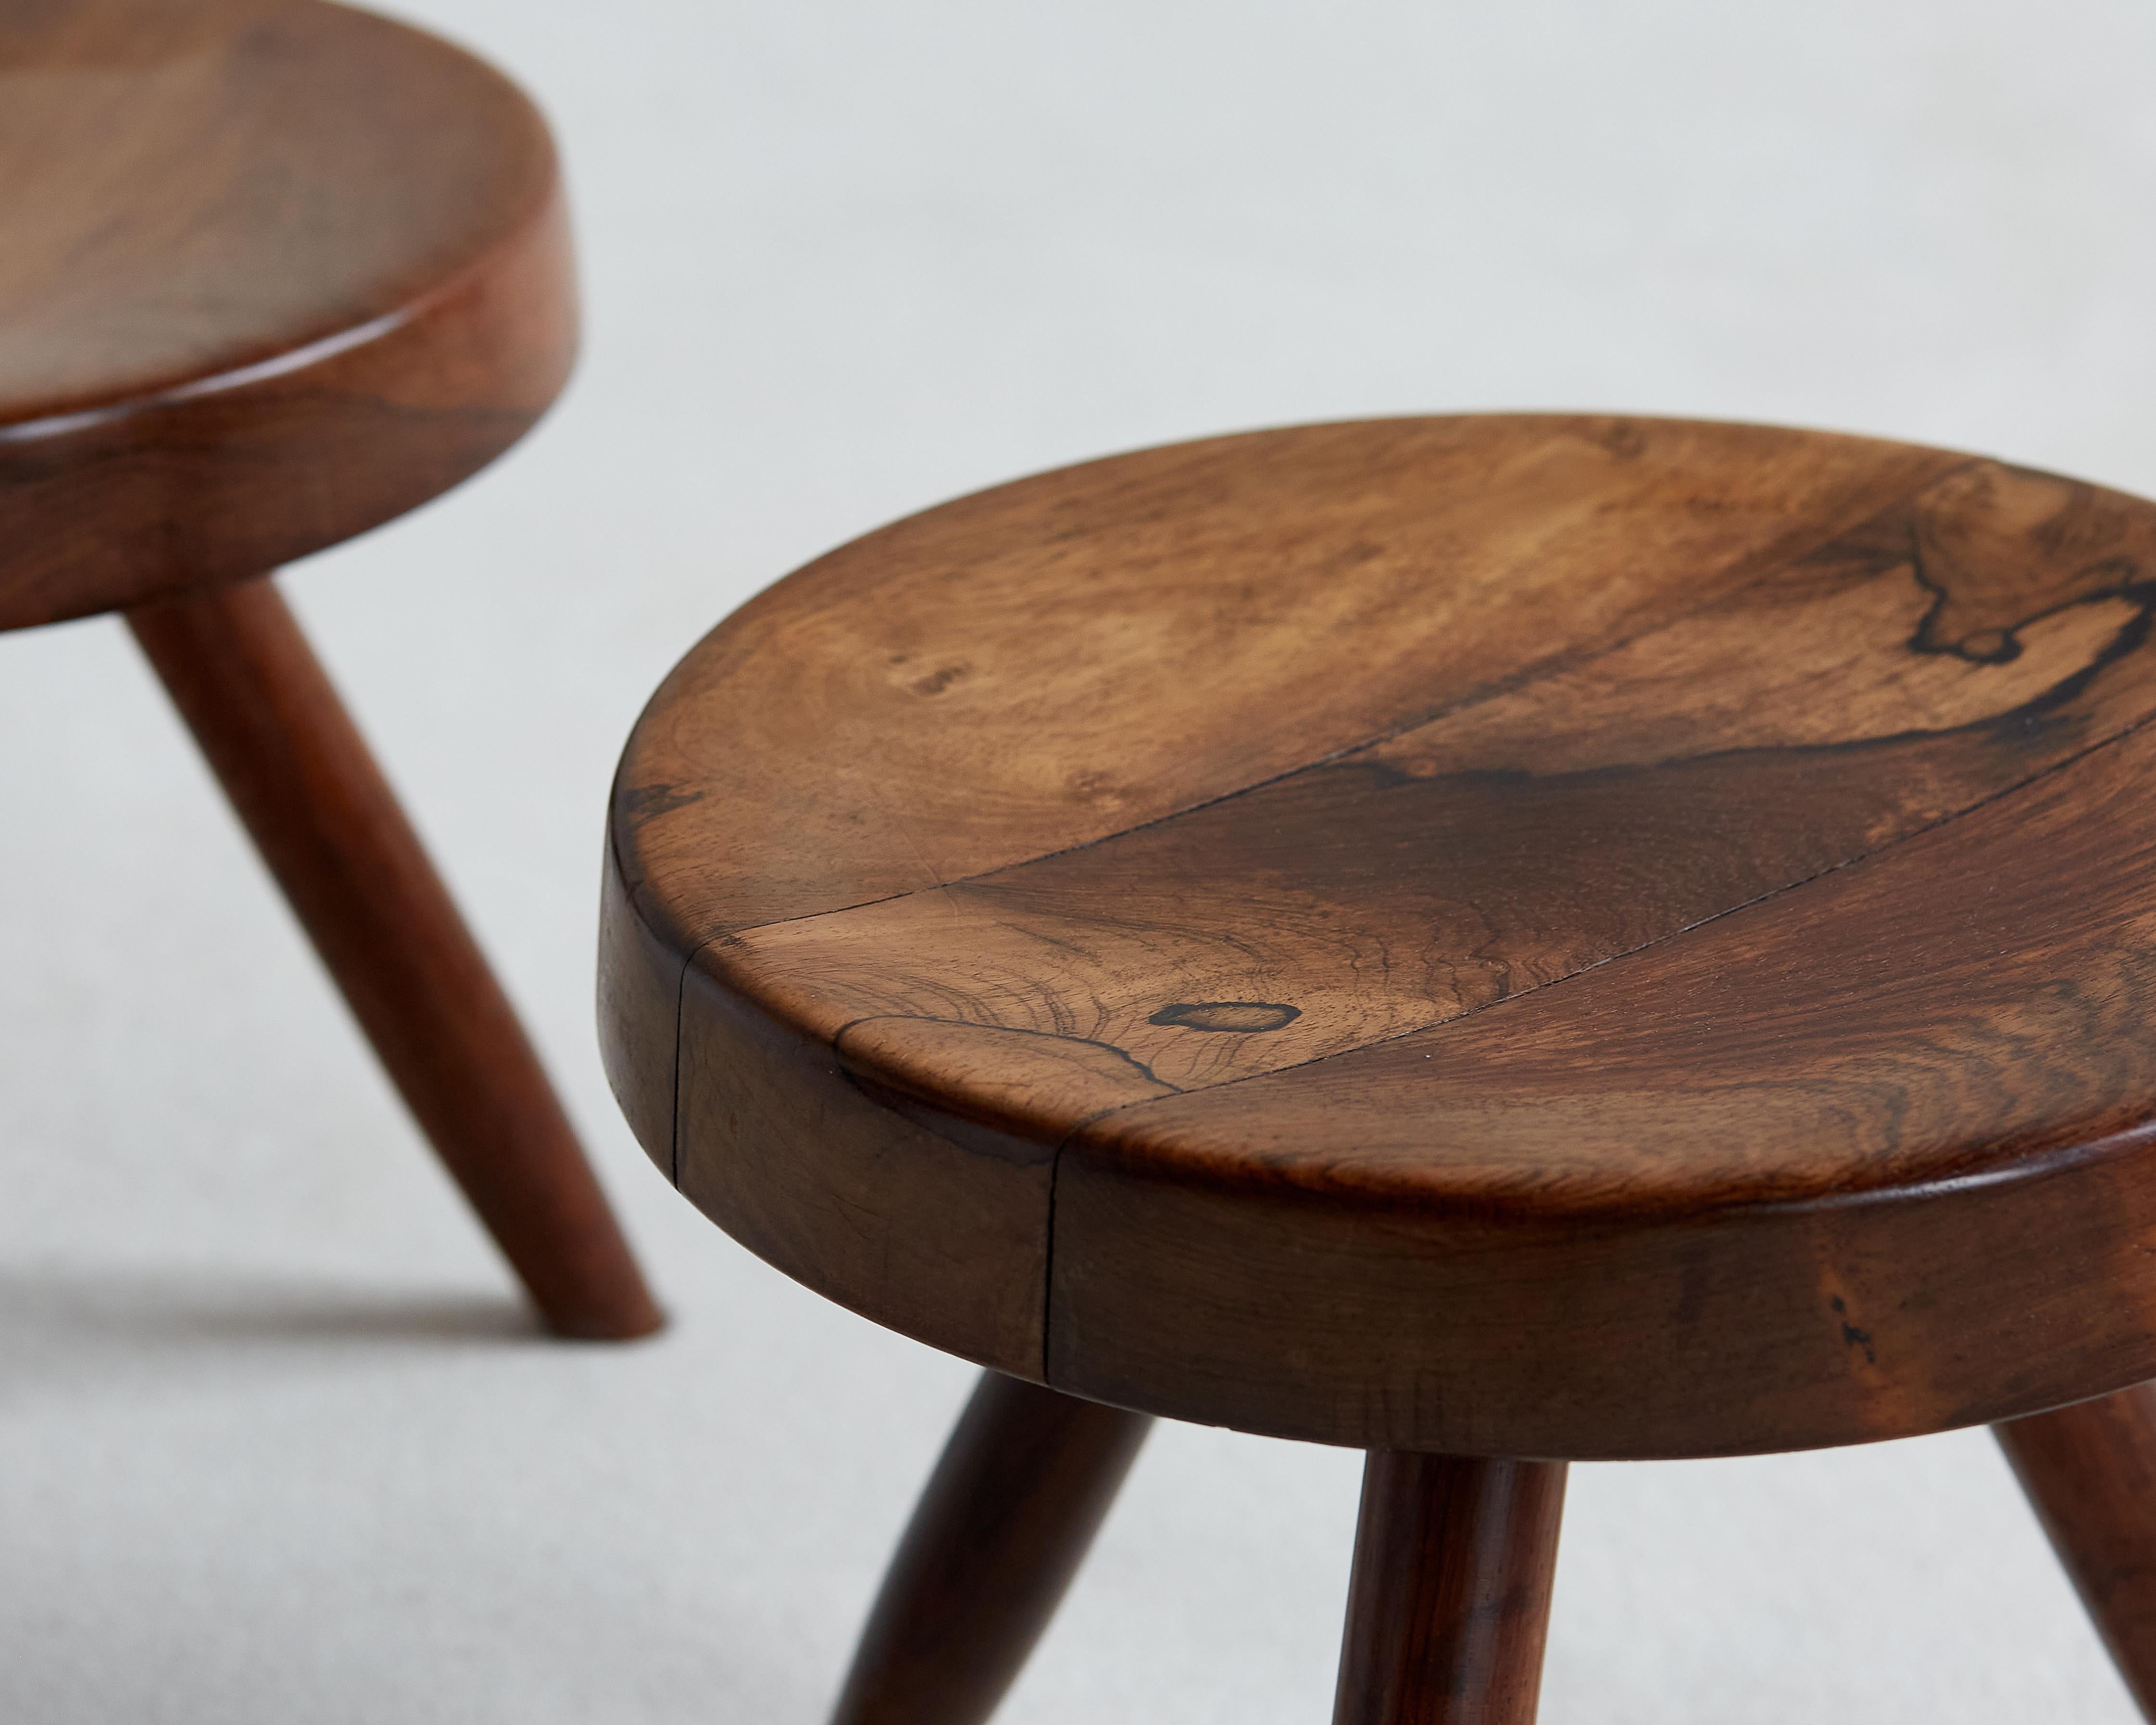 A rare pair of Charlotte Perriand Berger stools in Jacaranda, a Brazilian rosewood. There are very few of these stools in existence in jacaranda. 

Provenance: Acquired directly from the artist, circa 1970s; Private Collection, Rio de Janeiro;